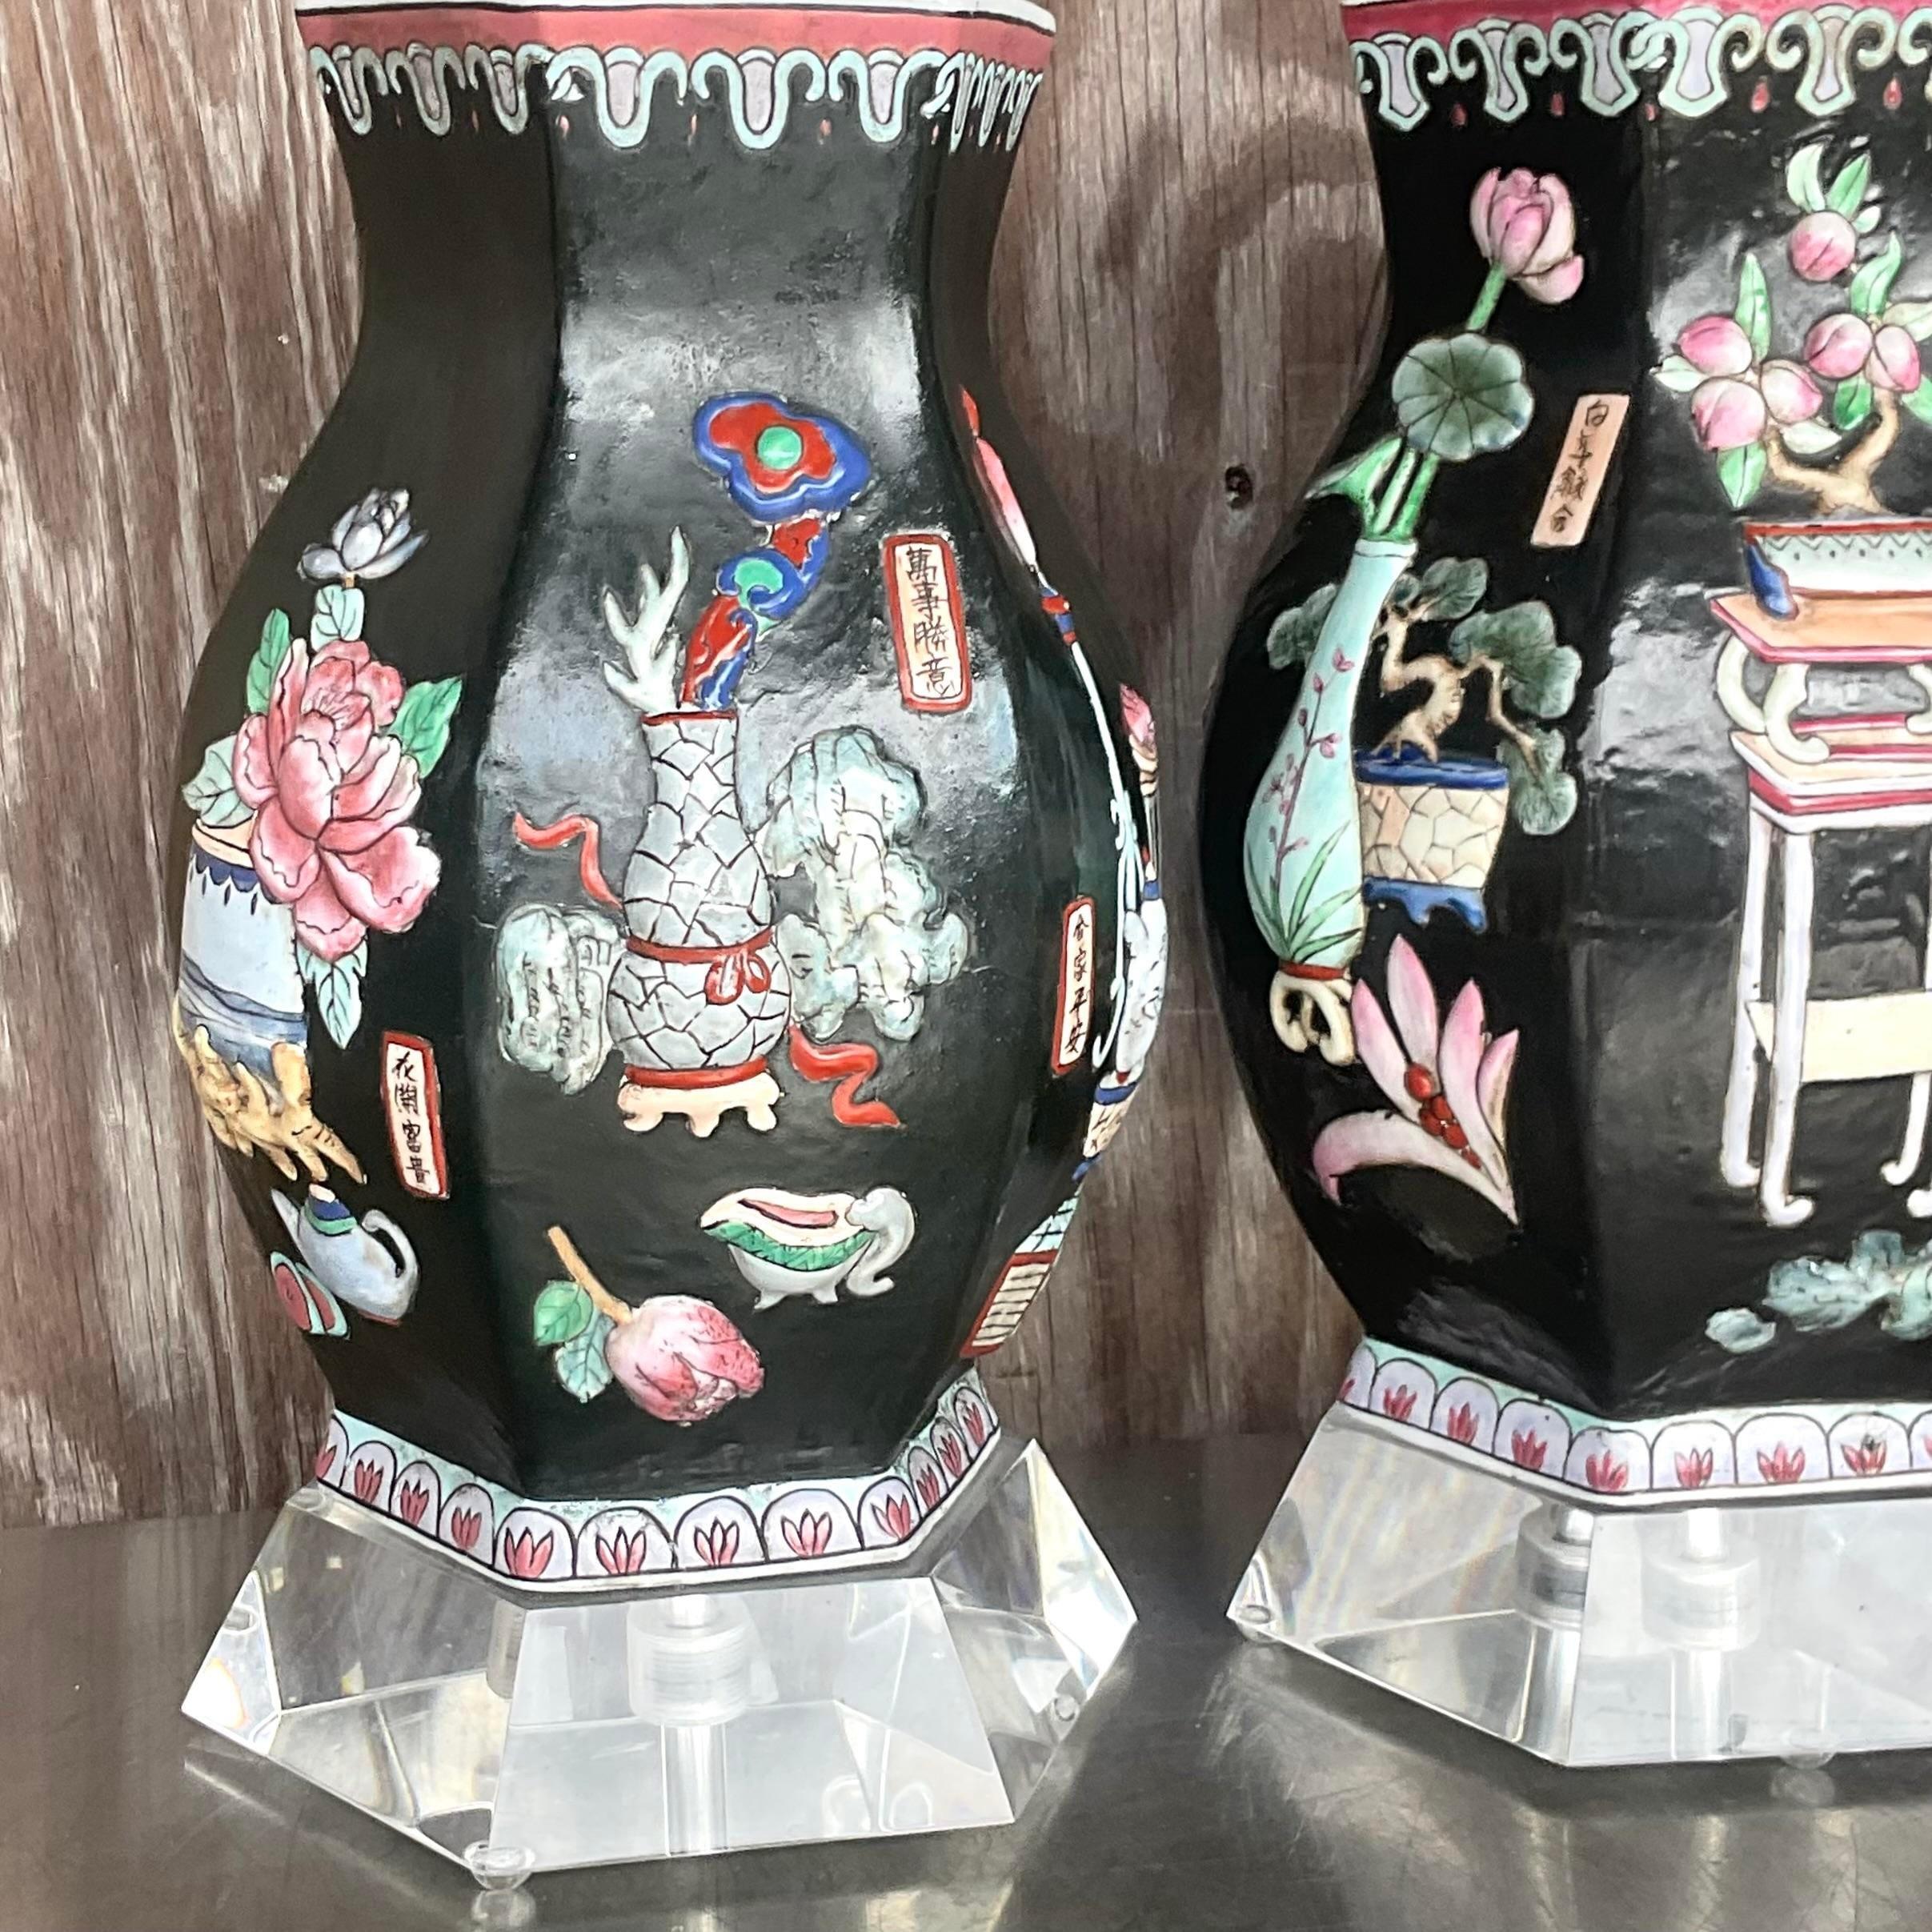 Metal Vintage Asian Chinoiserie Relief Glazed Ceramic Lamps - a Pair For Sale